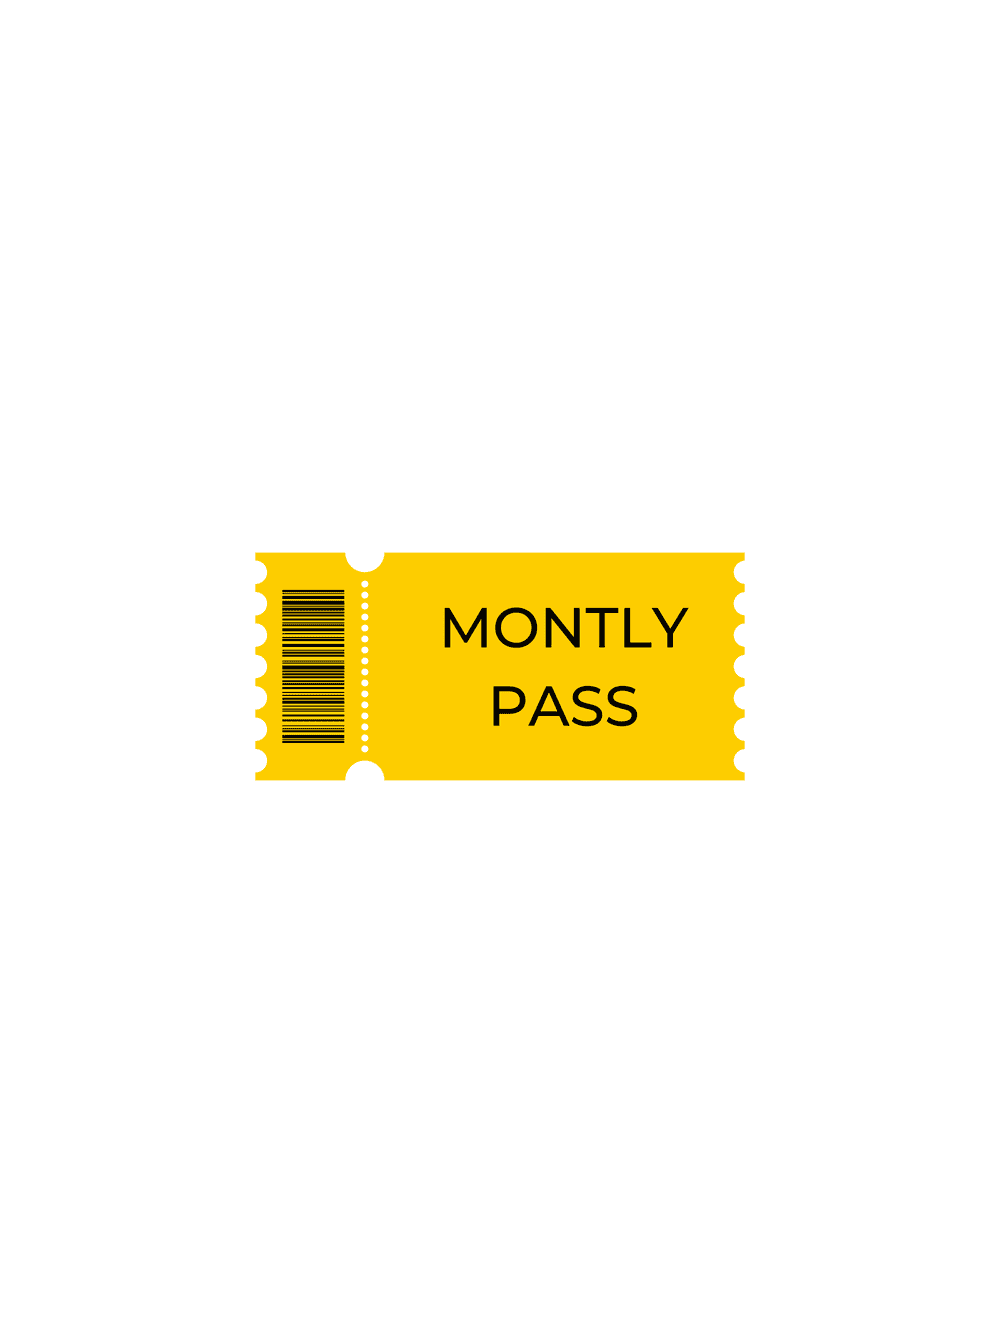 Monthly pass